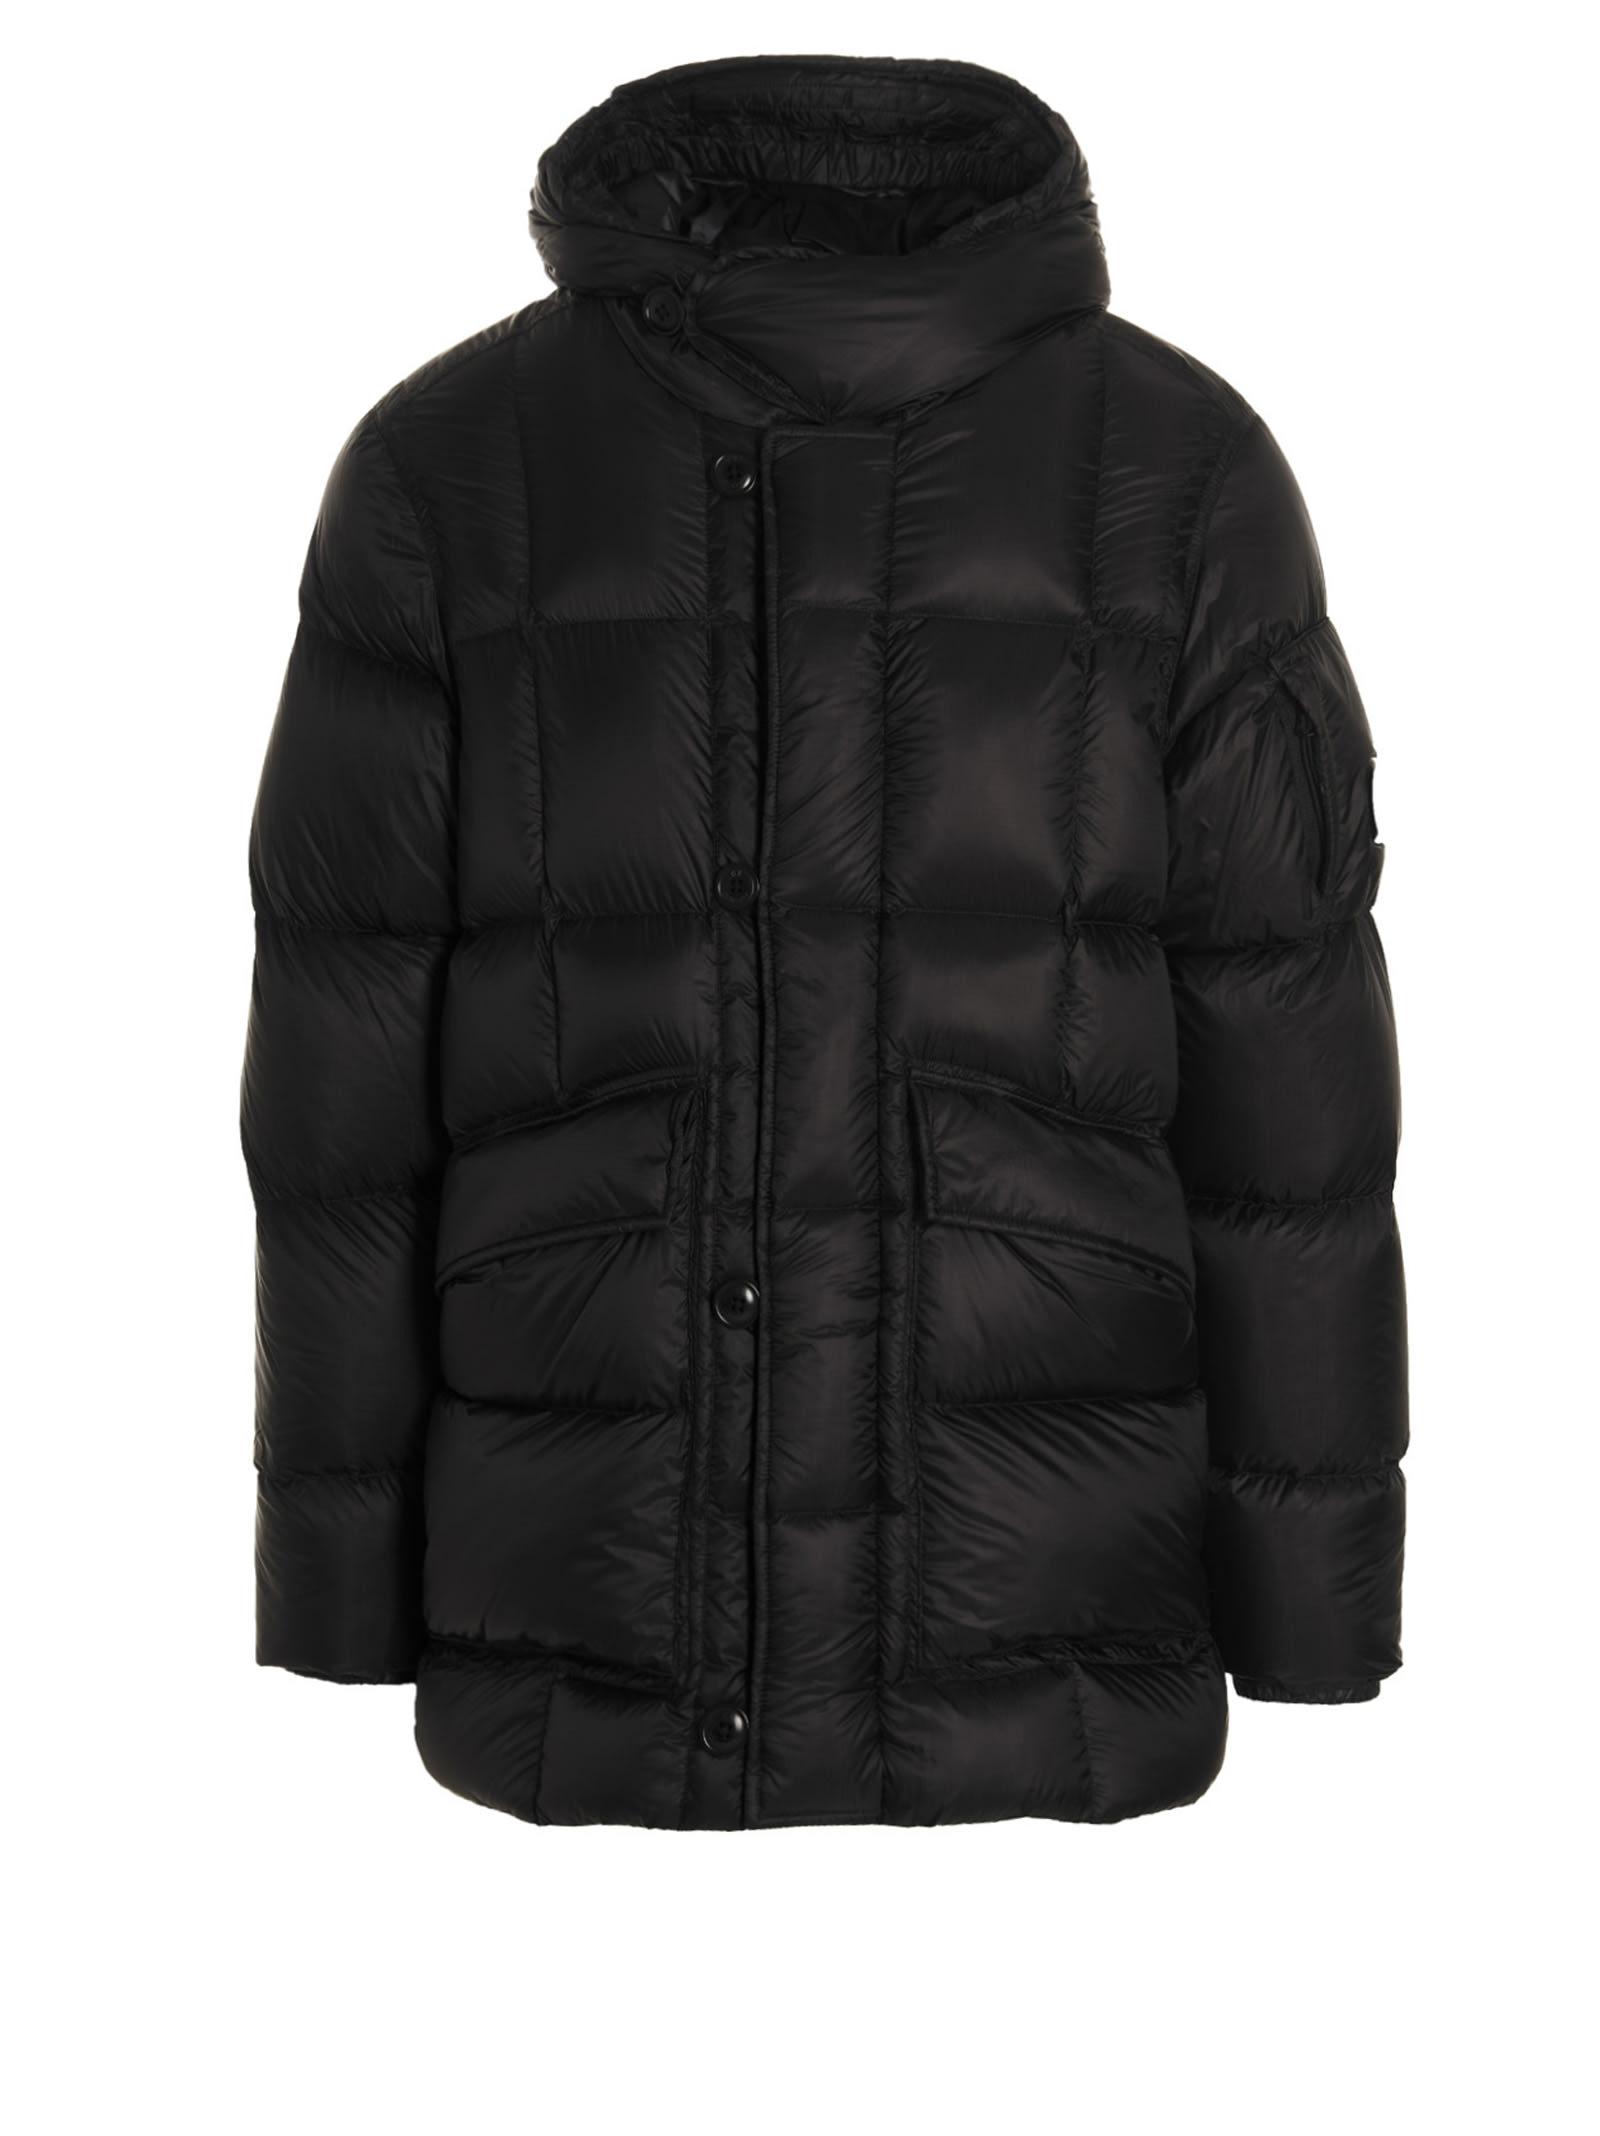 C.P. Company Dd Shell Hooded Down Jacket in Black for Men | Lyst